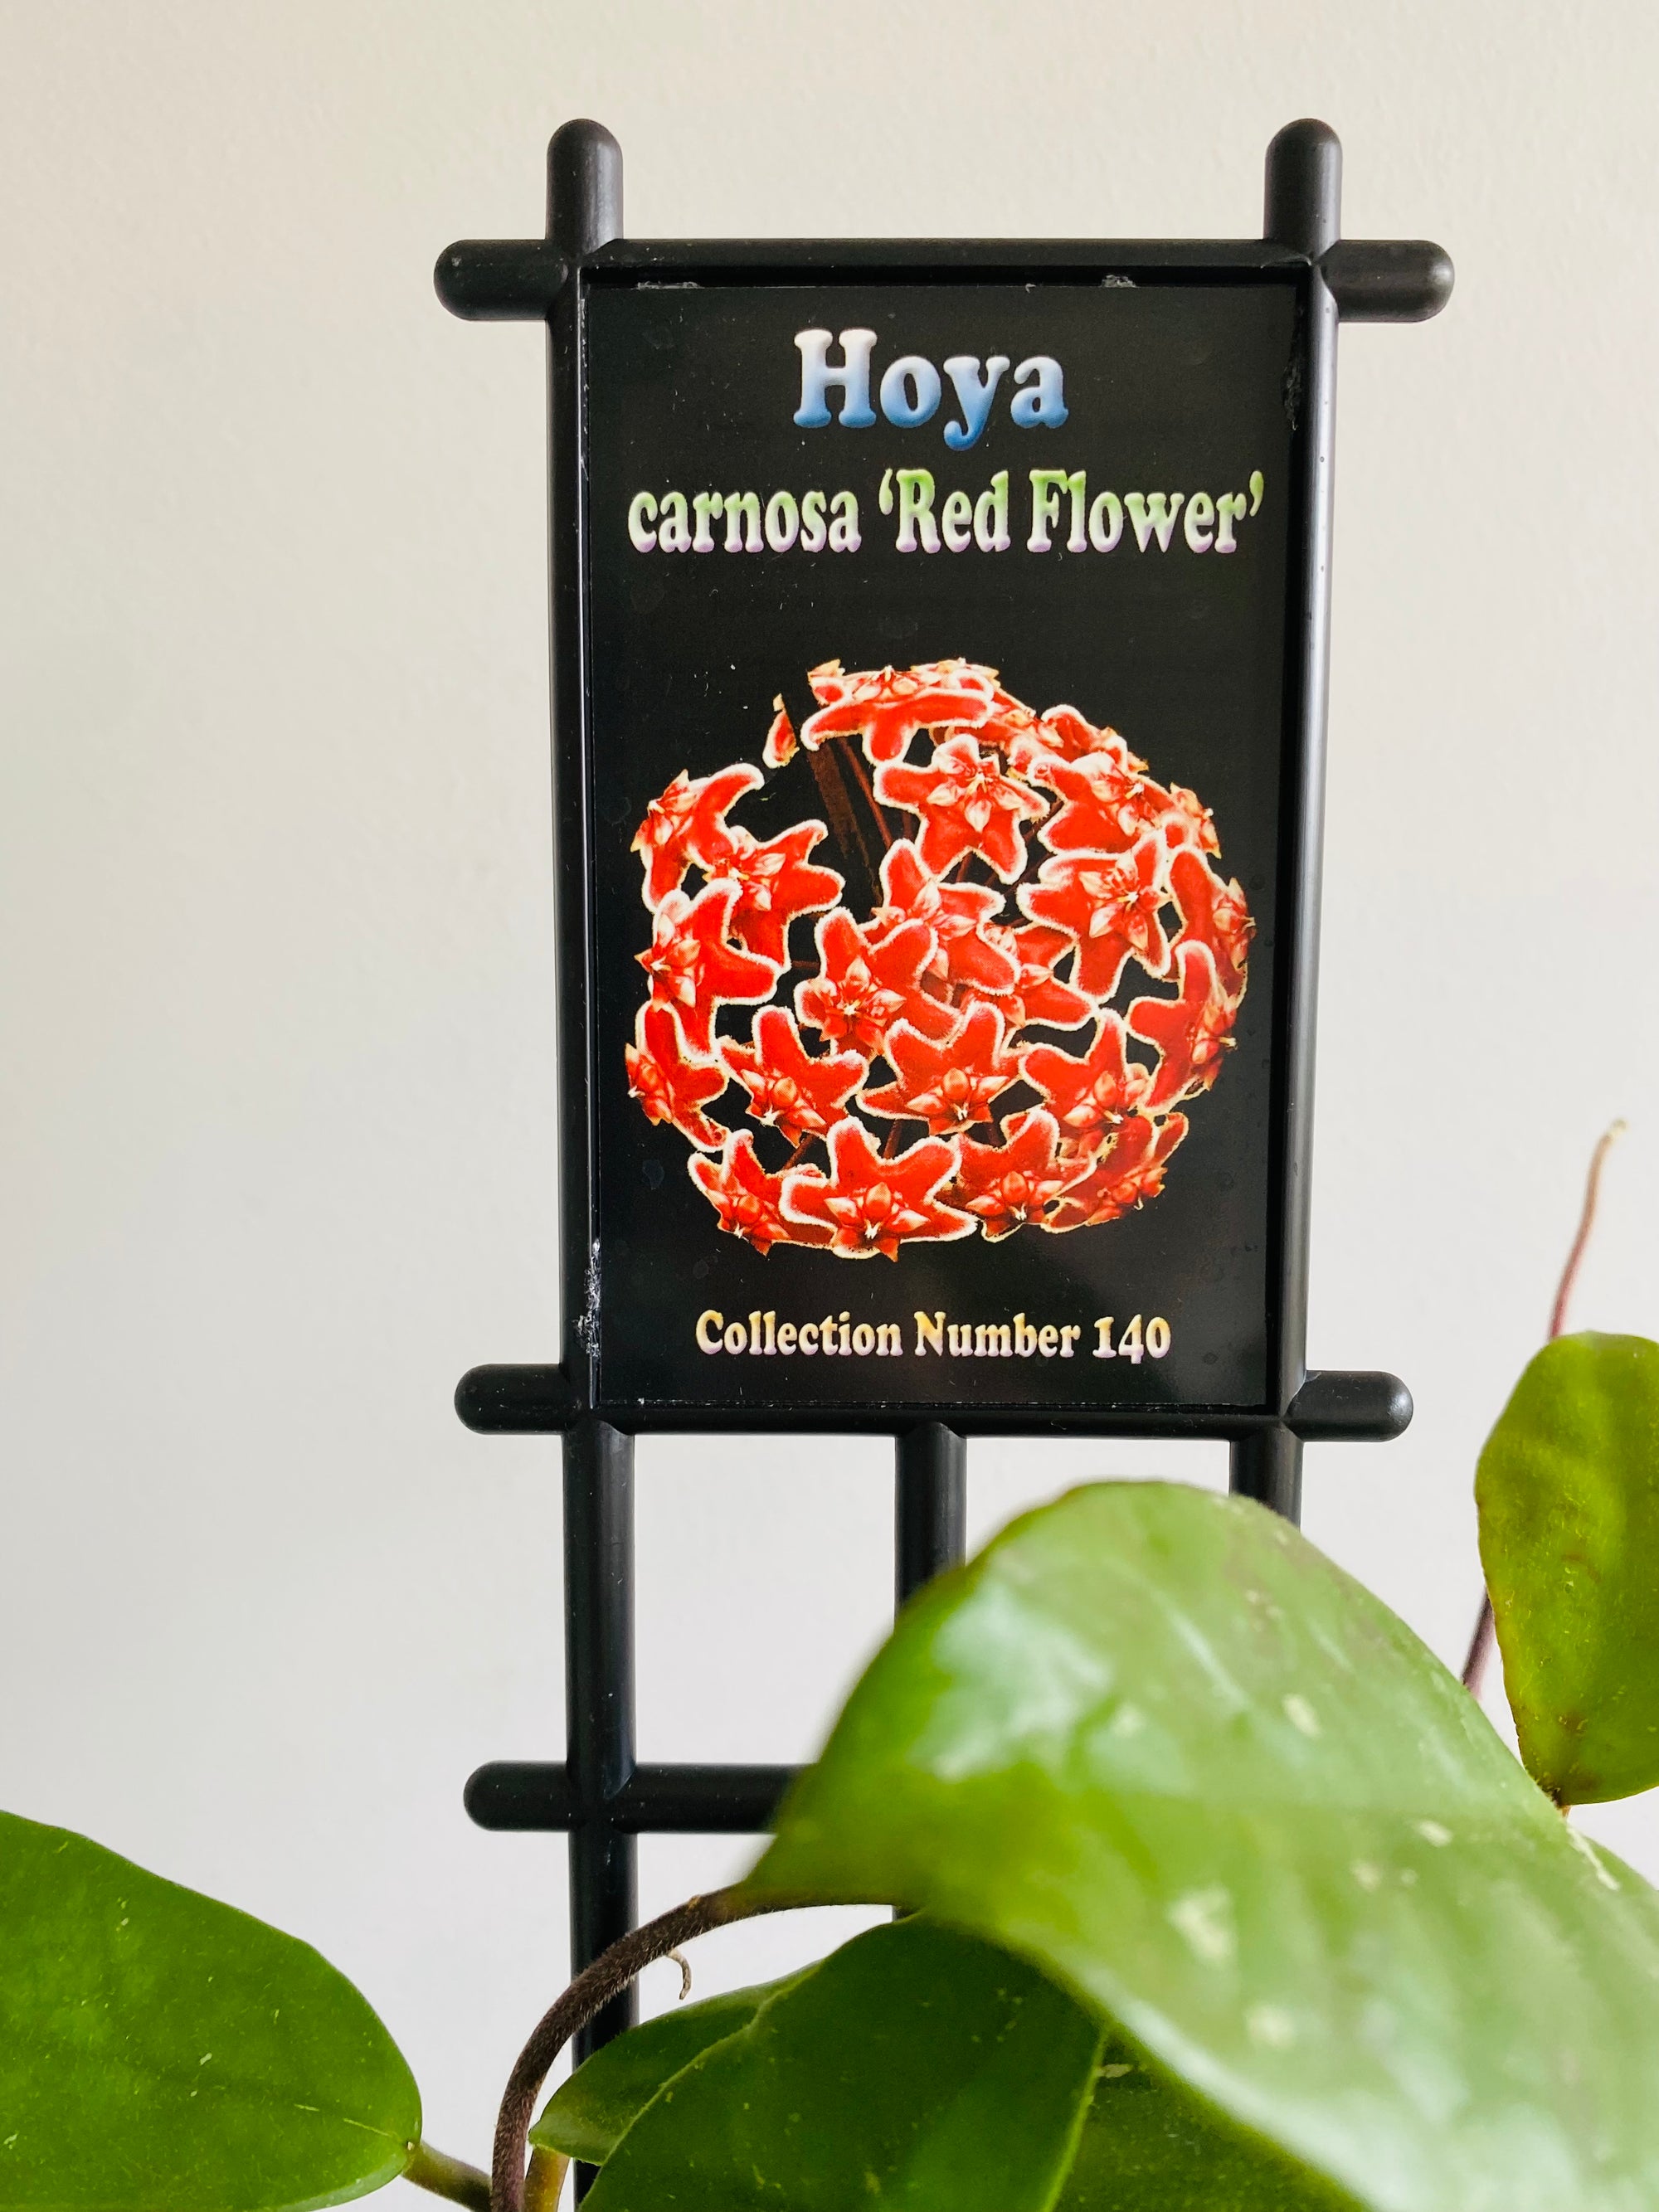 Hoya - Carnosa Red Flower Collection No. 140